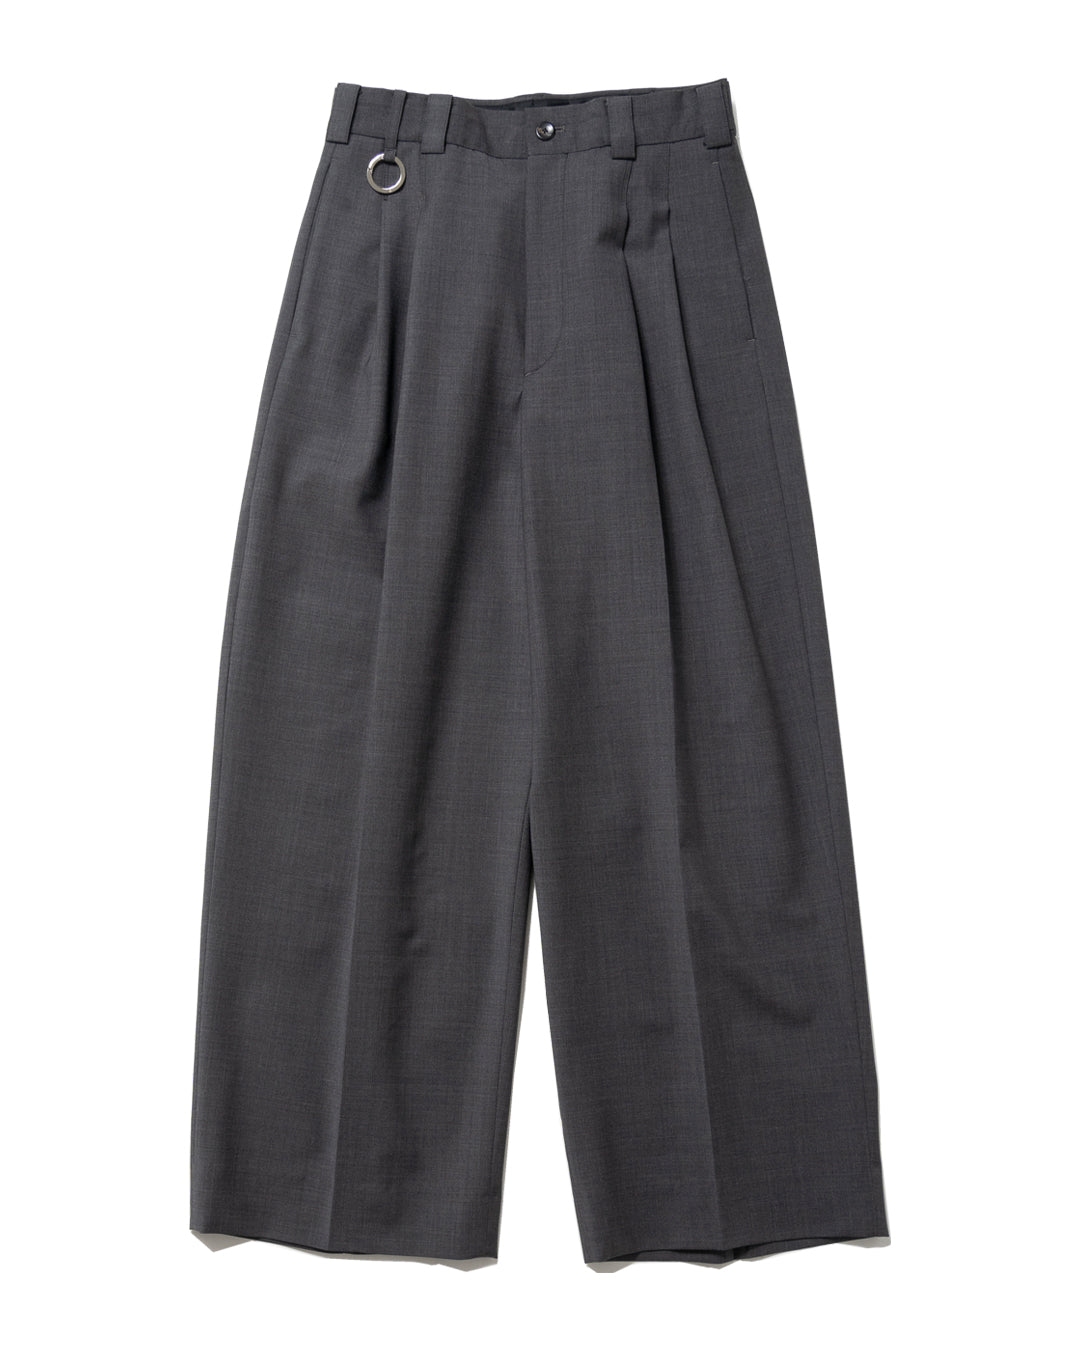 EXTRA VOLUMED TAPERED PANTS